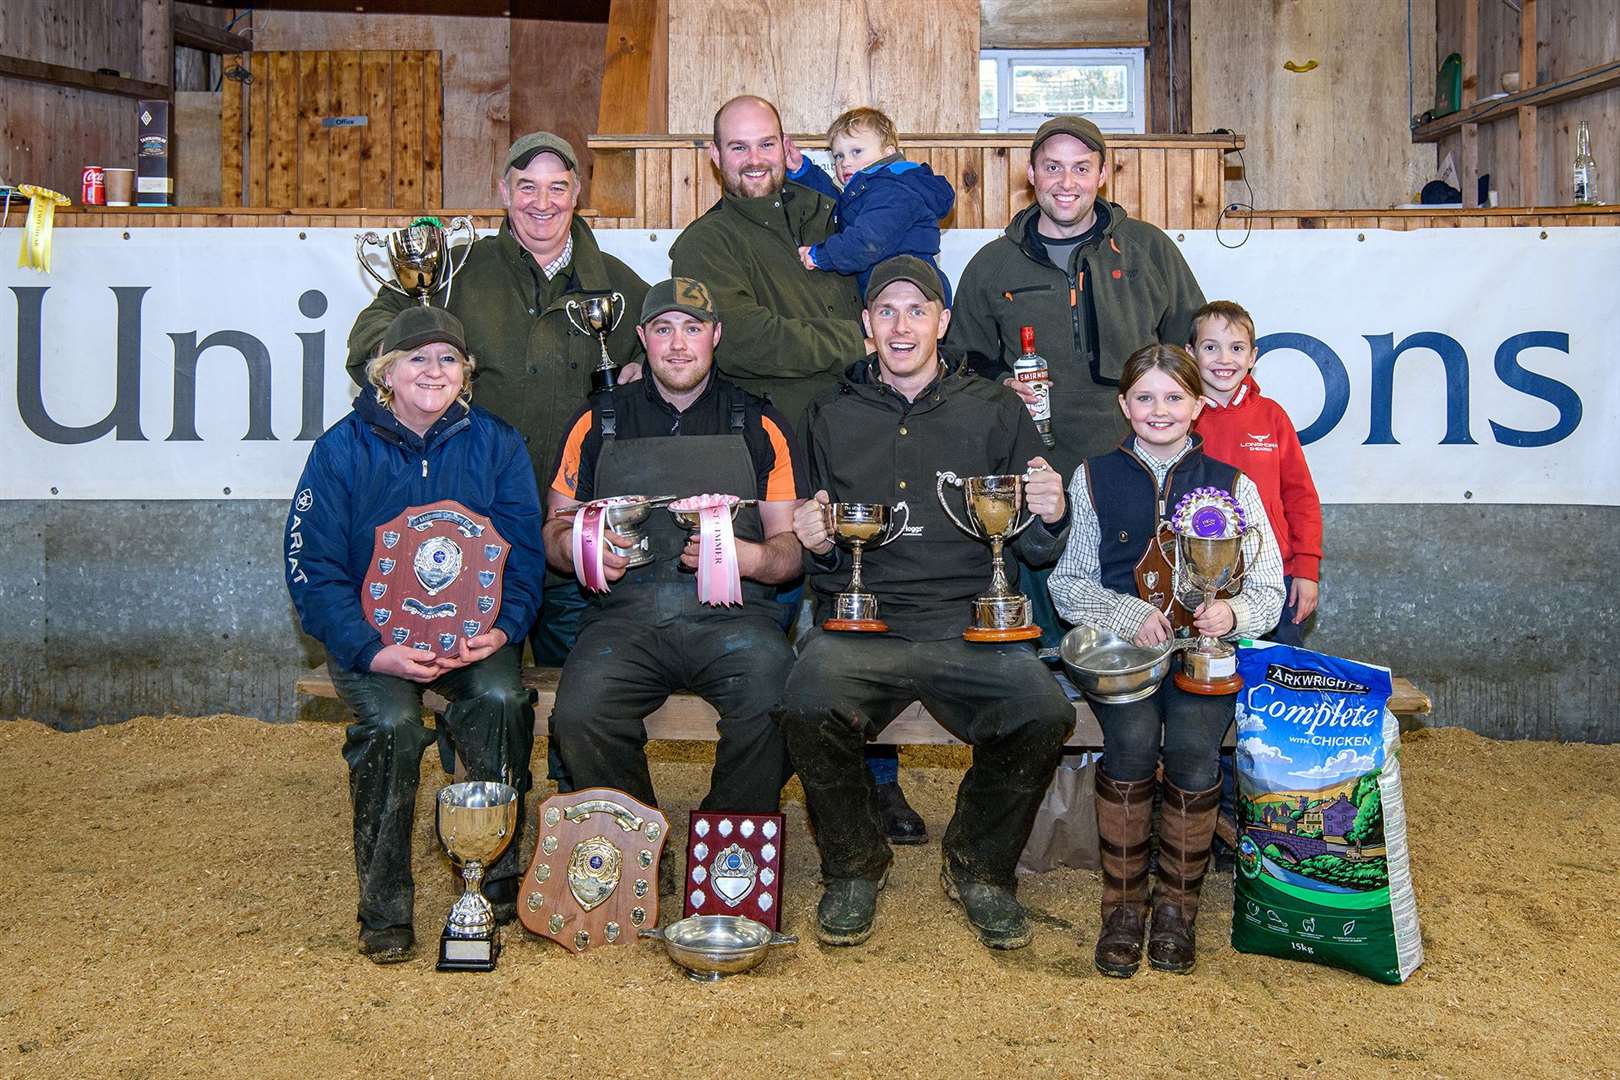 Prizewinners (front from left) – Jan Mackenzie, Michael Kirk, Martyn Cook and Ava Cook. Back row – Hugh Mackenzie, judge Bob Rennie with his son Andrew, and Ali Robertson with his son Kaiden. Picture: Angus Mackay